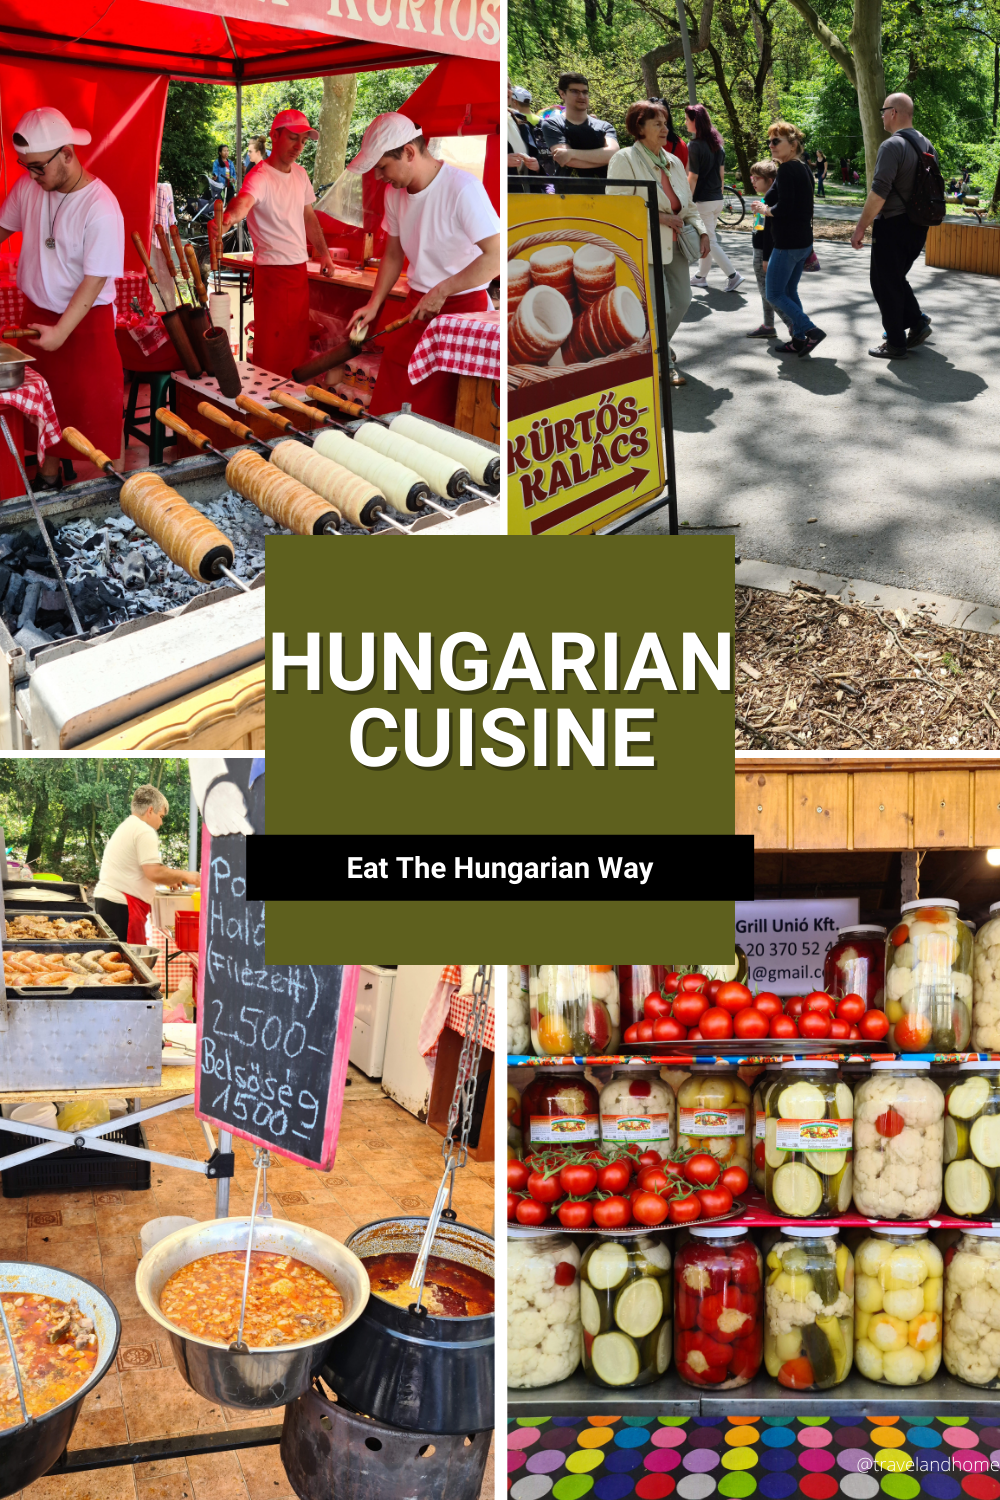 The traditions in Hungary festivals in Szeged Hungary things to do in Hungary Life in Hungary traditional Hungarian street food cuisine